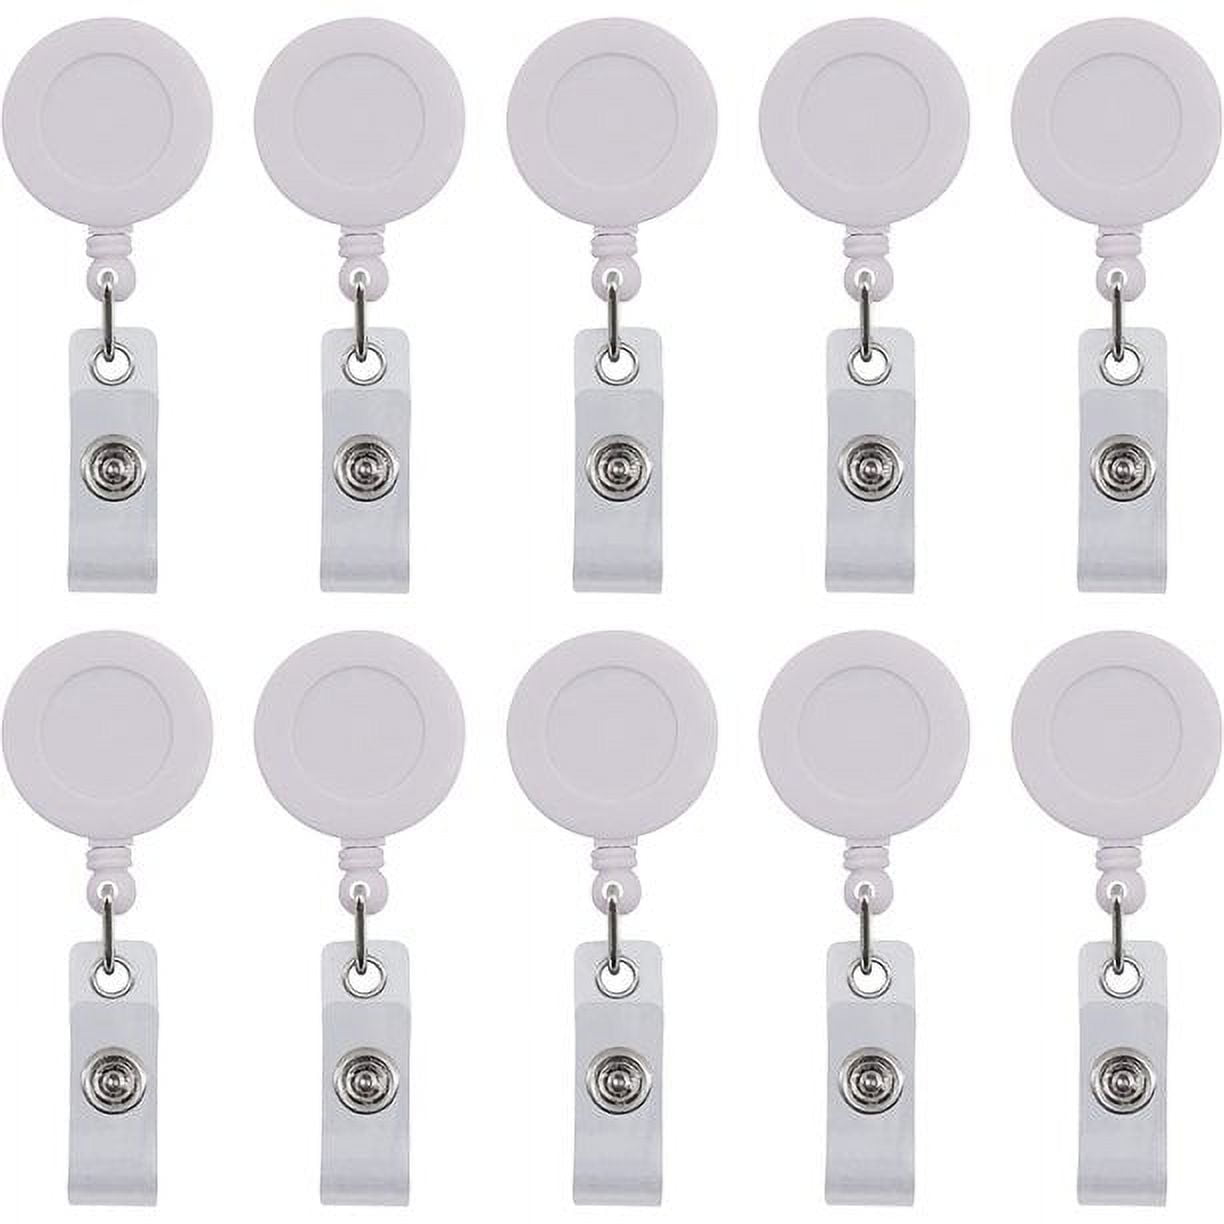 5pcs Retractable Id Badge Holders Id Badge Reels With Clip On